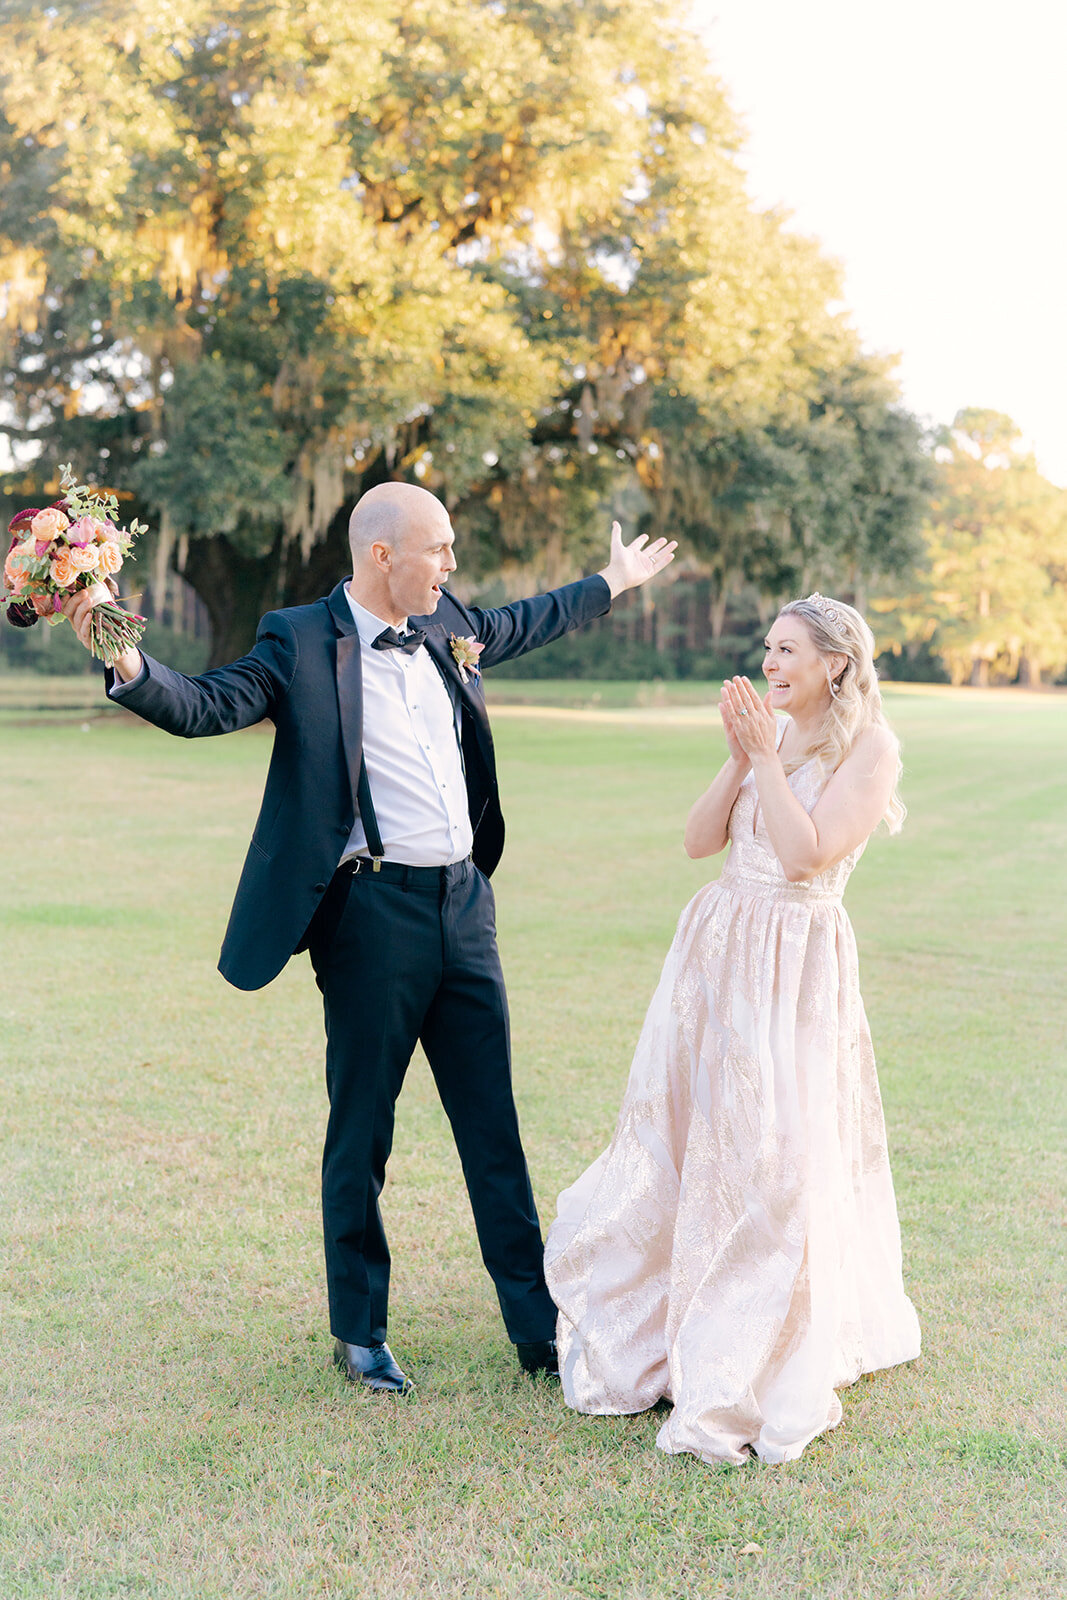 Intimate elopement in Charleston. Bride and groom celebrate during golden sunset at intimate elopement in Charleston.